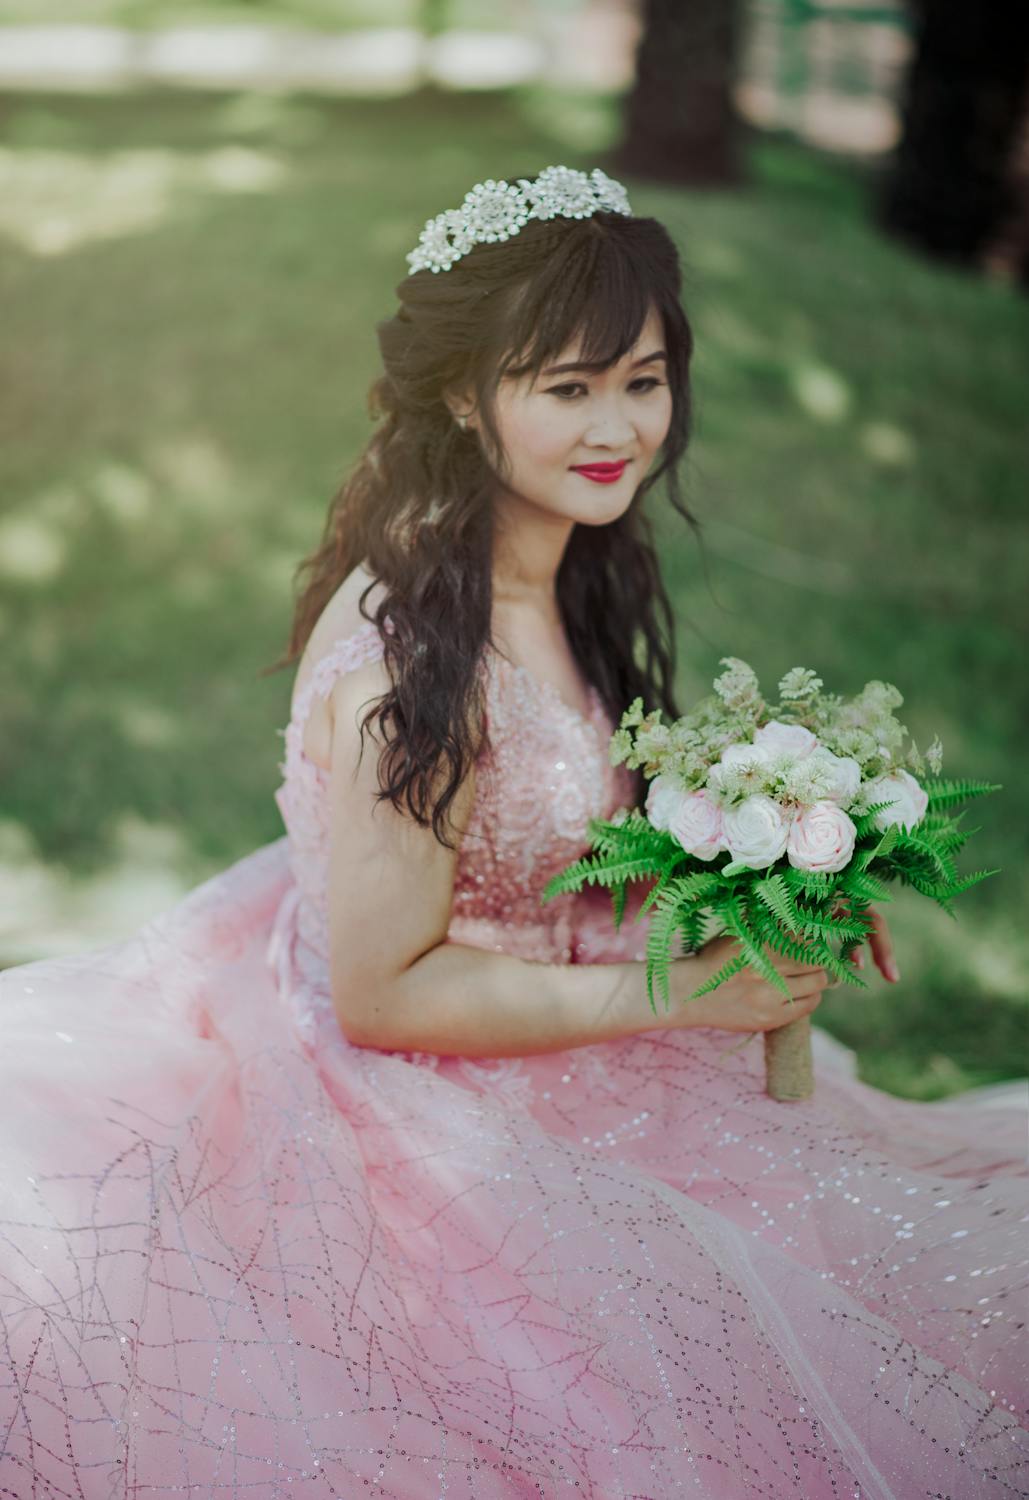 Women's Pink Gown · Free Stock Photo